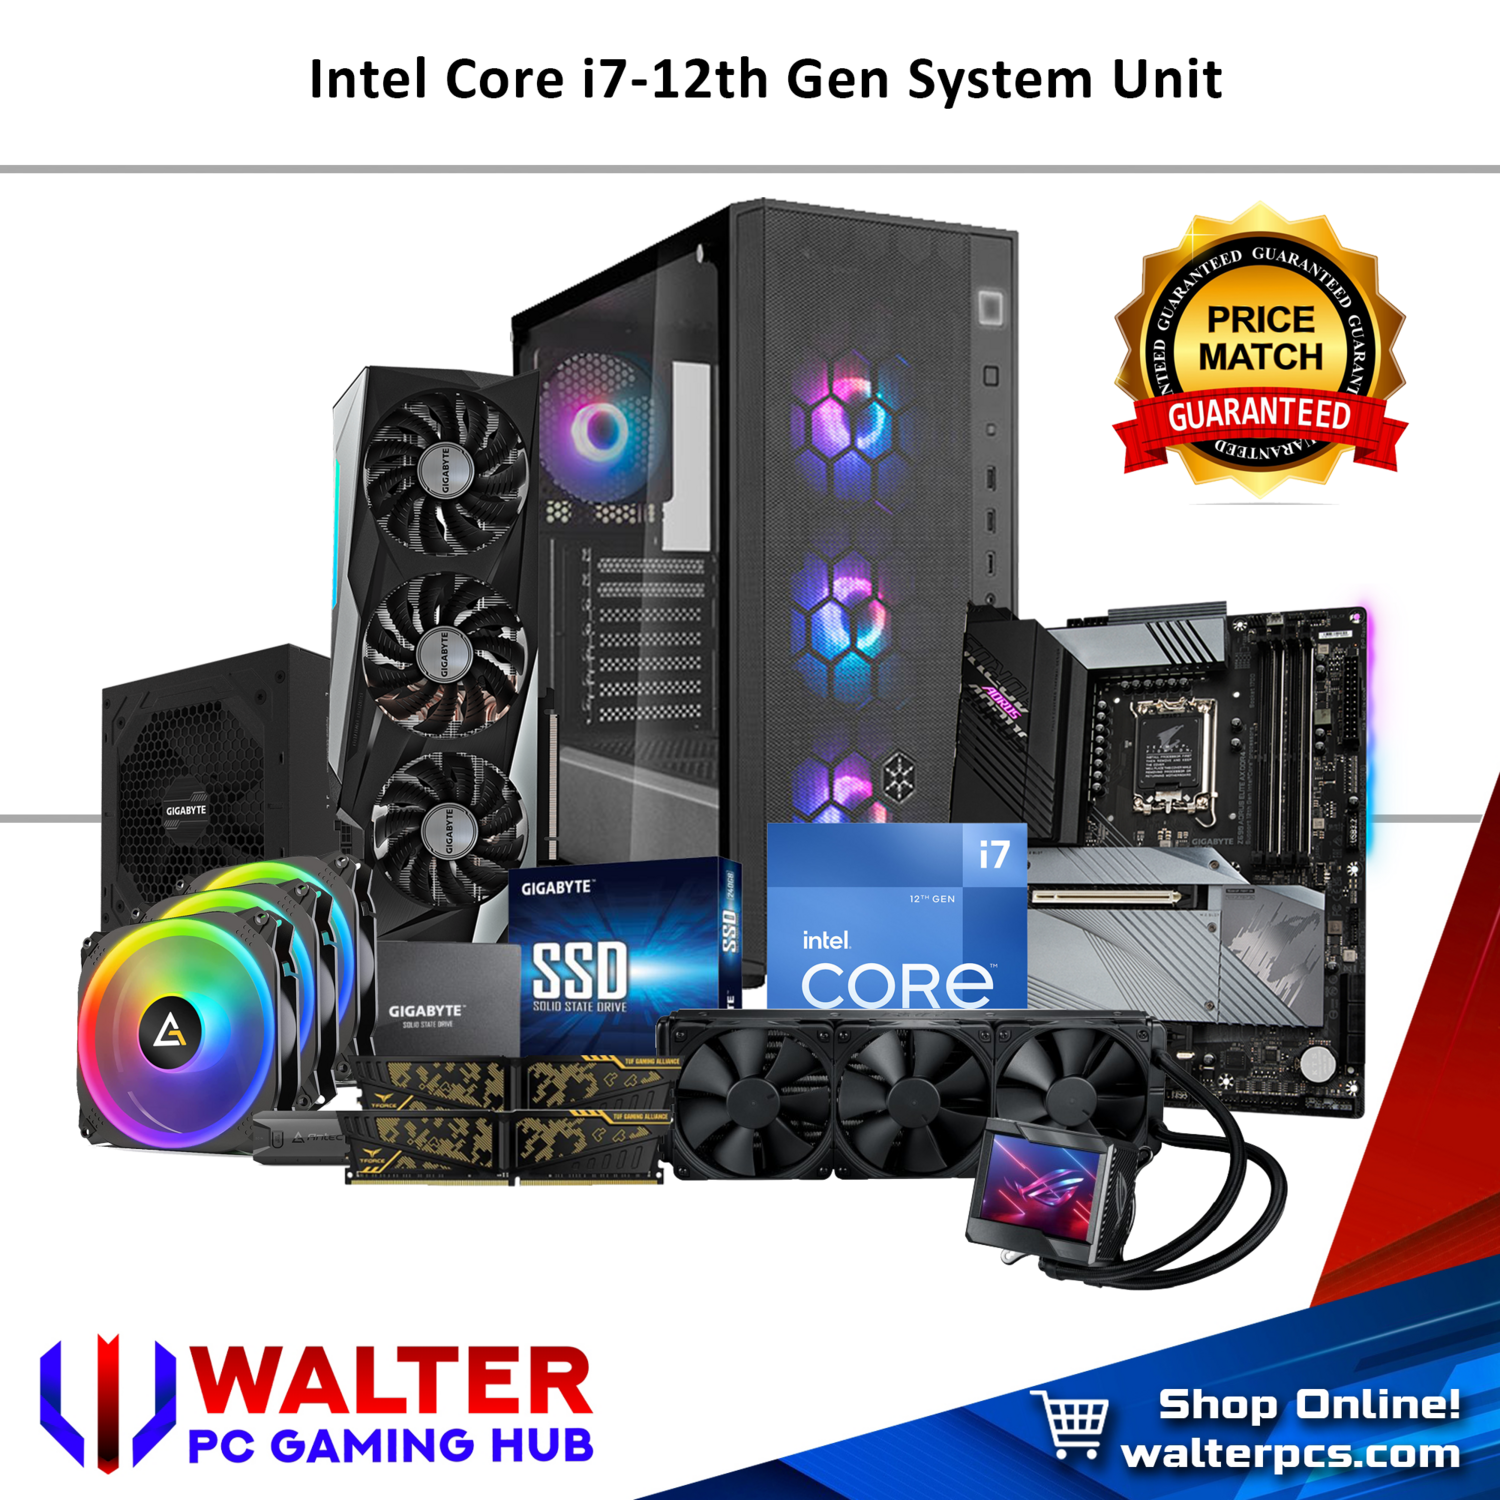 Intel Core i7 12th Gen System Unit Package